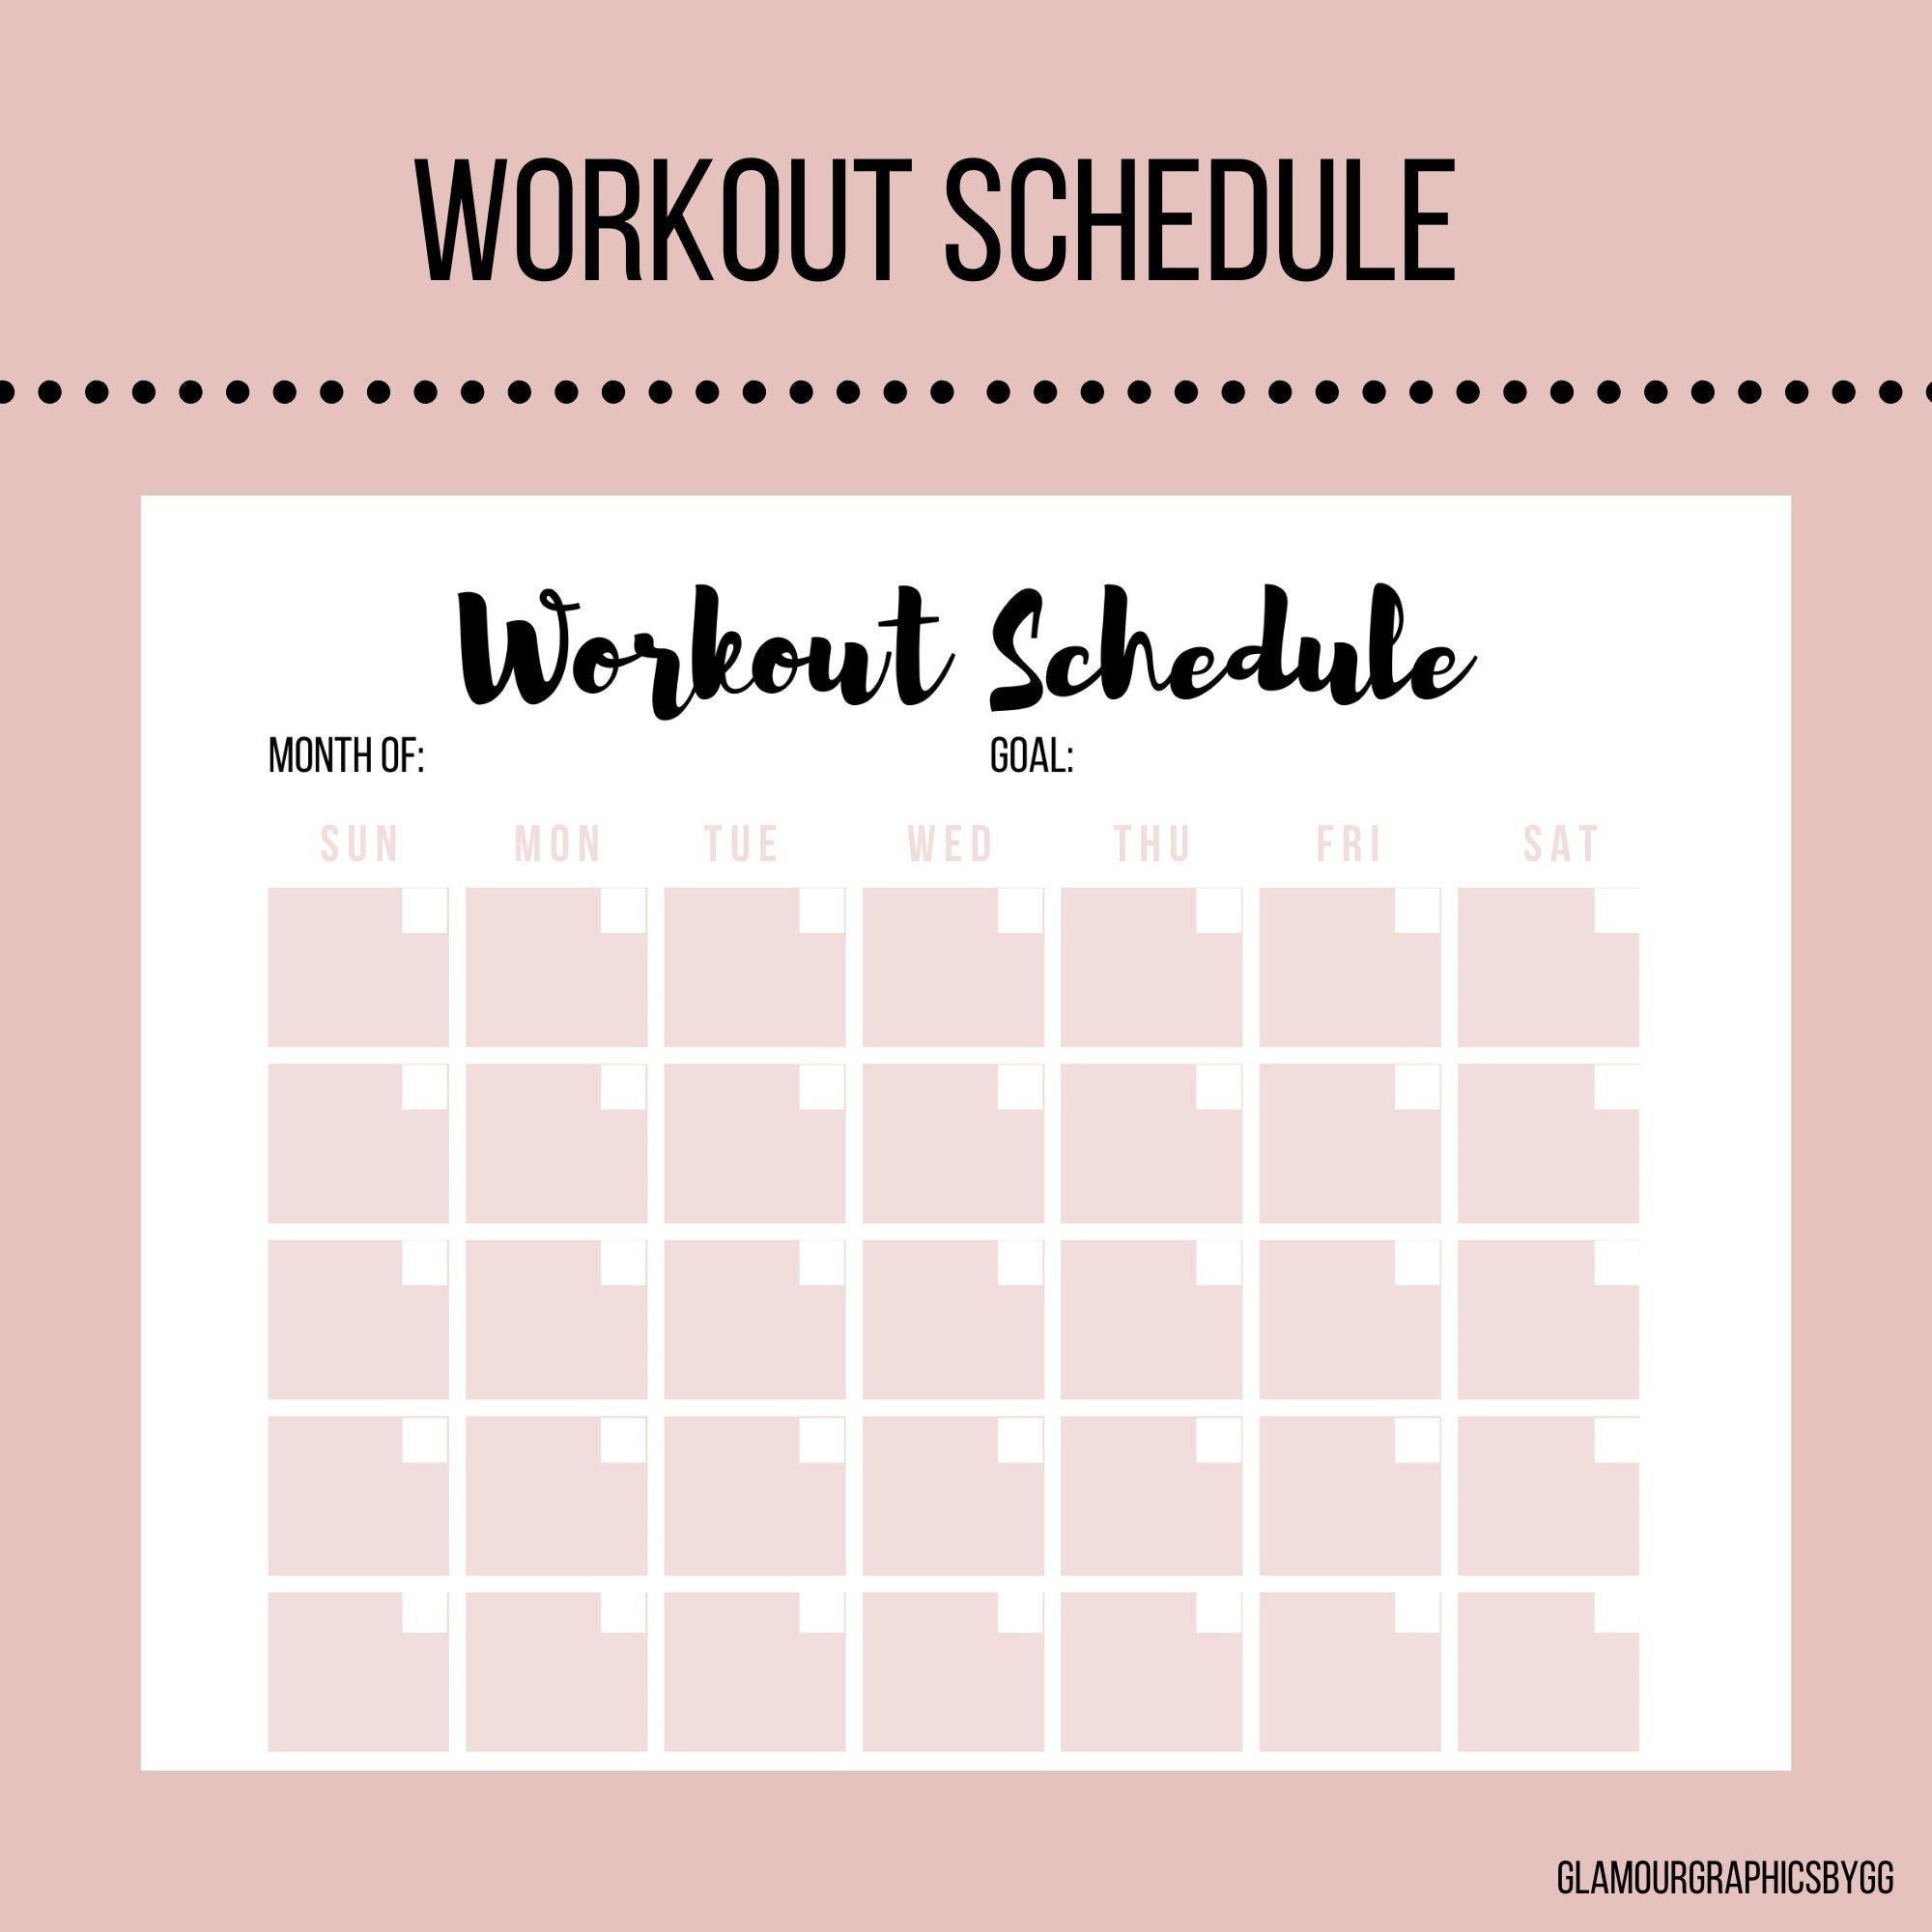 Workout Schedule| Fitness Planner| Workout Printable| Blush| 8.5x11in - Workout Schedule| Fitness Planner| Workout Printable| Blush| 8.5x11in -   17 fitness Challenge women ideas